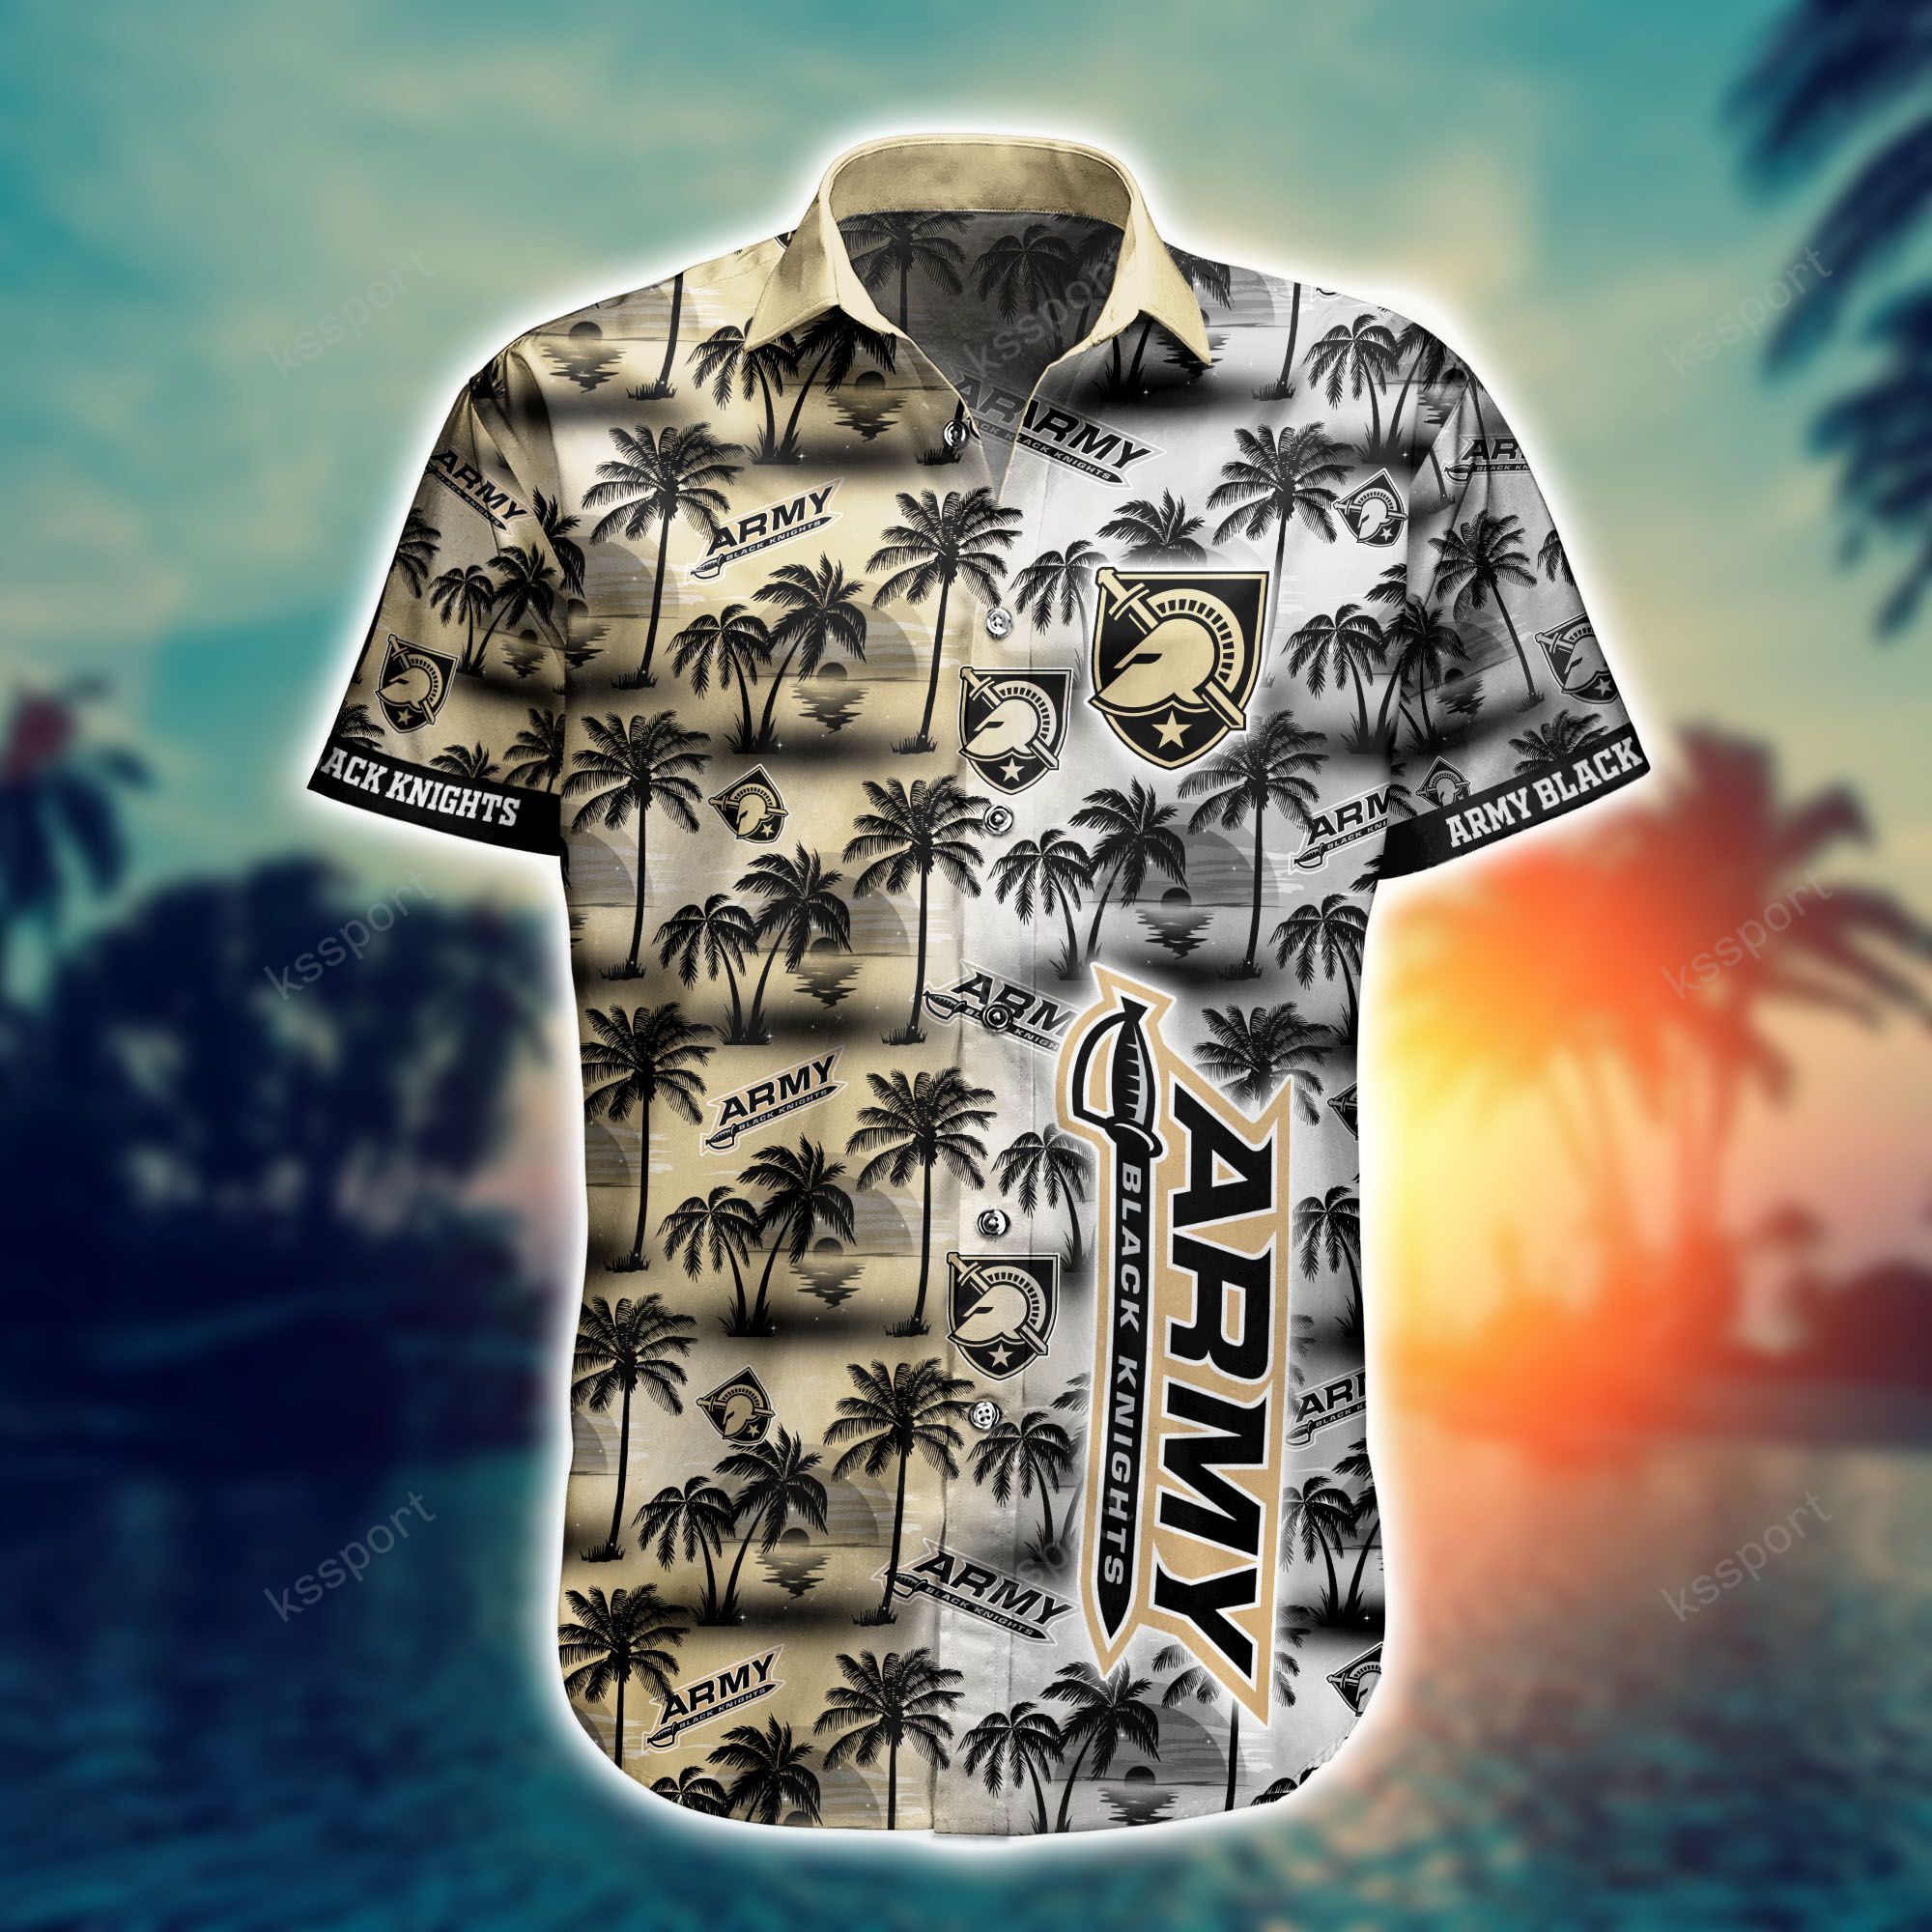 Top cool Hawaiian shirt 2022 - Make sure you get yours today before they run out! 121